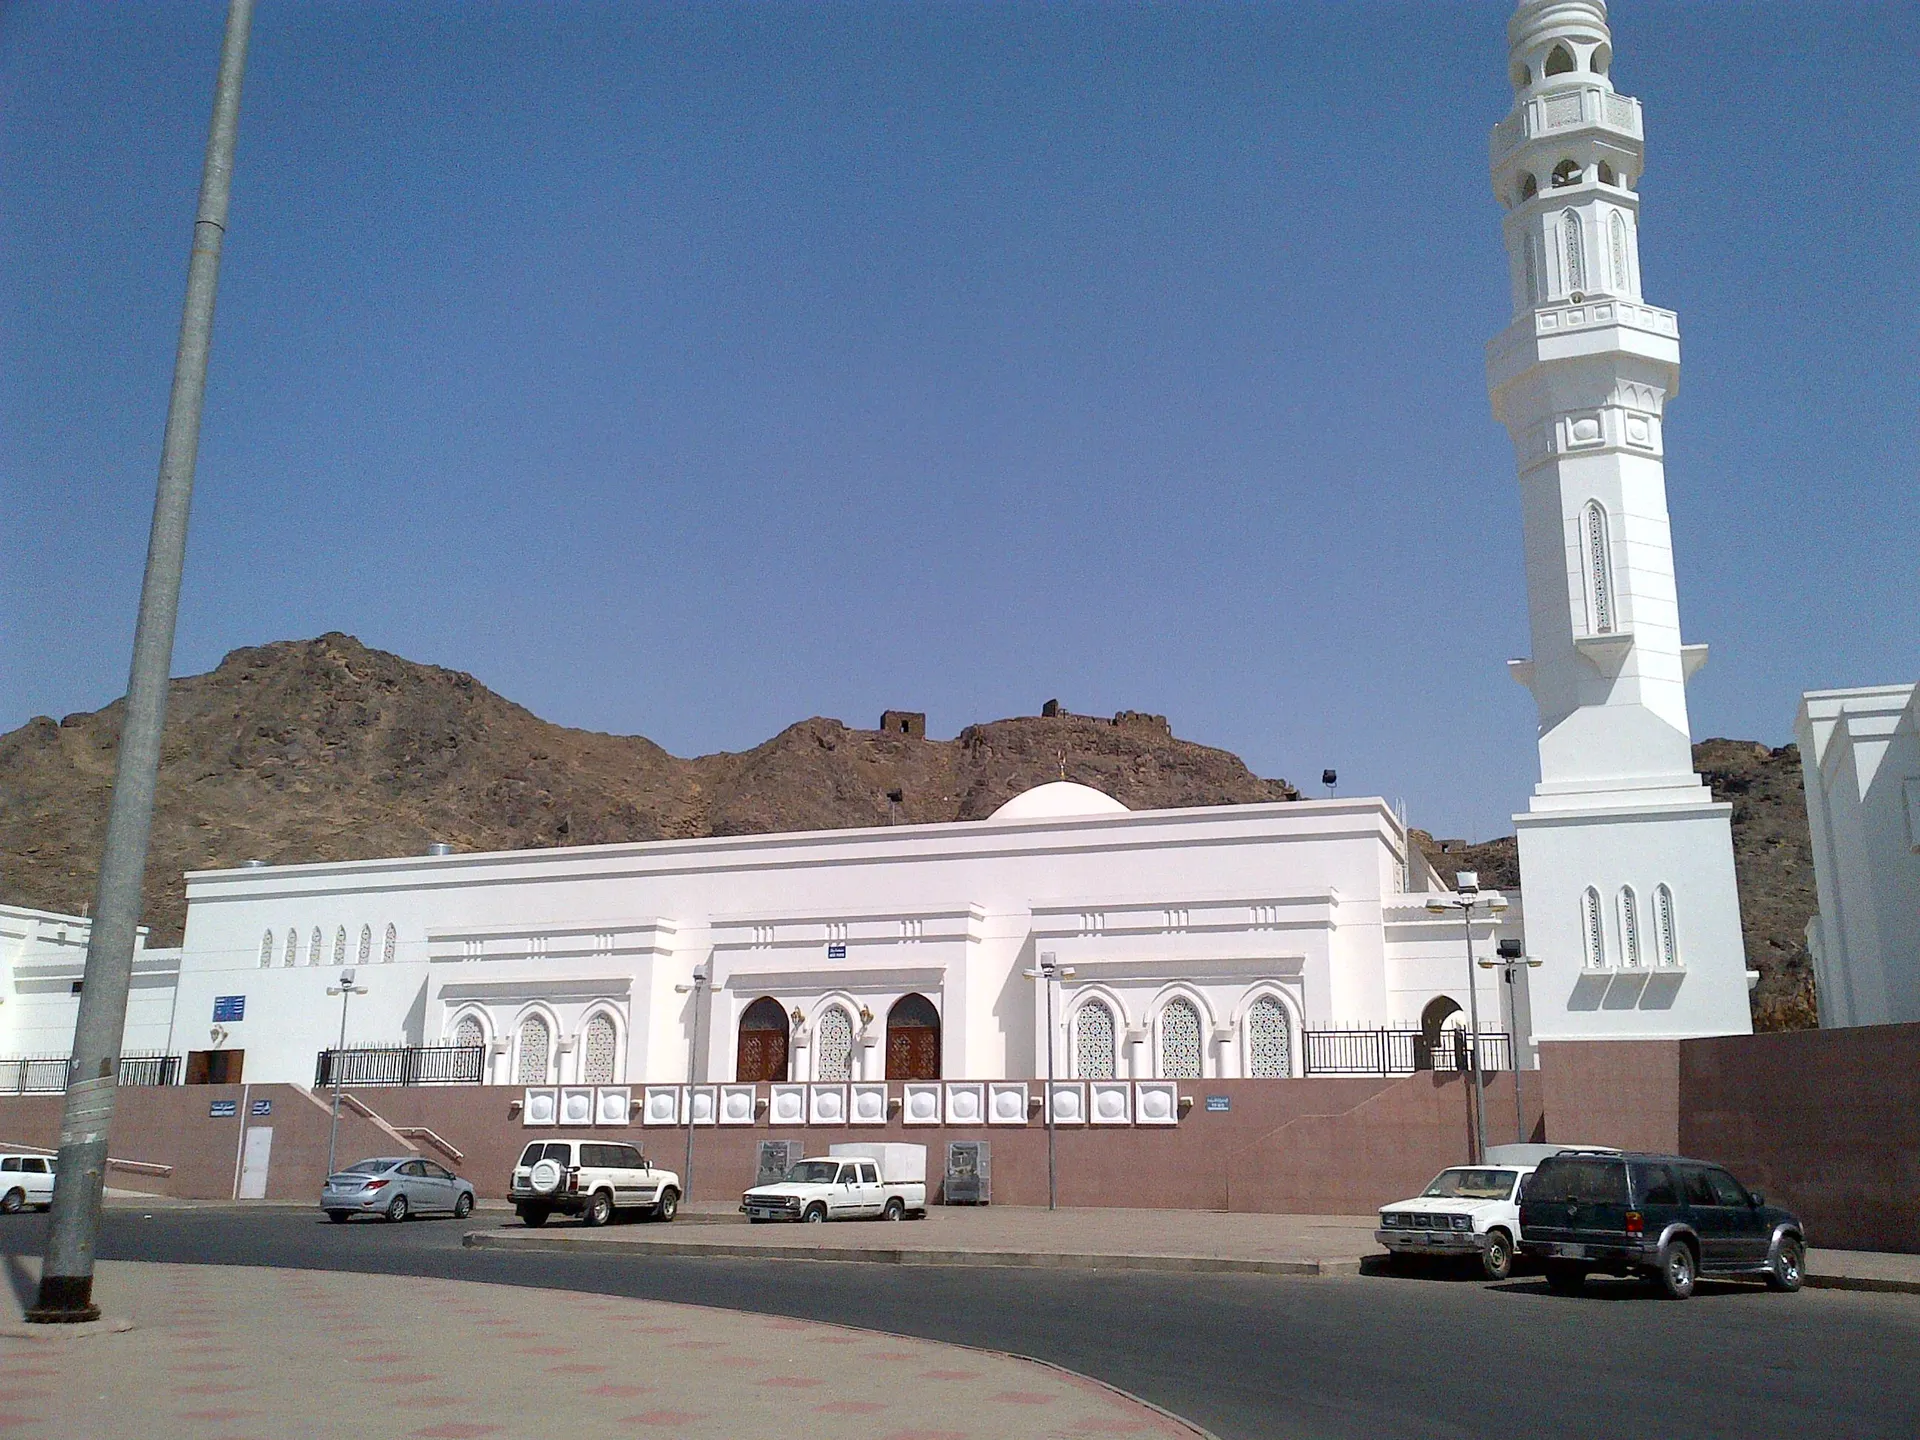 The Seven Mosques